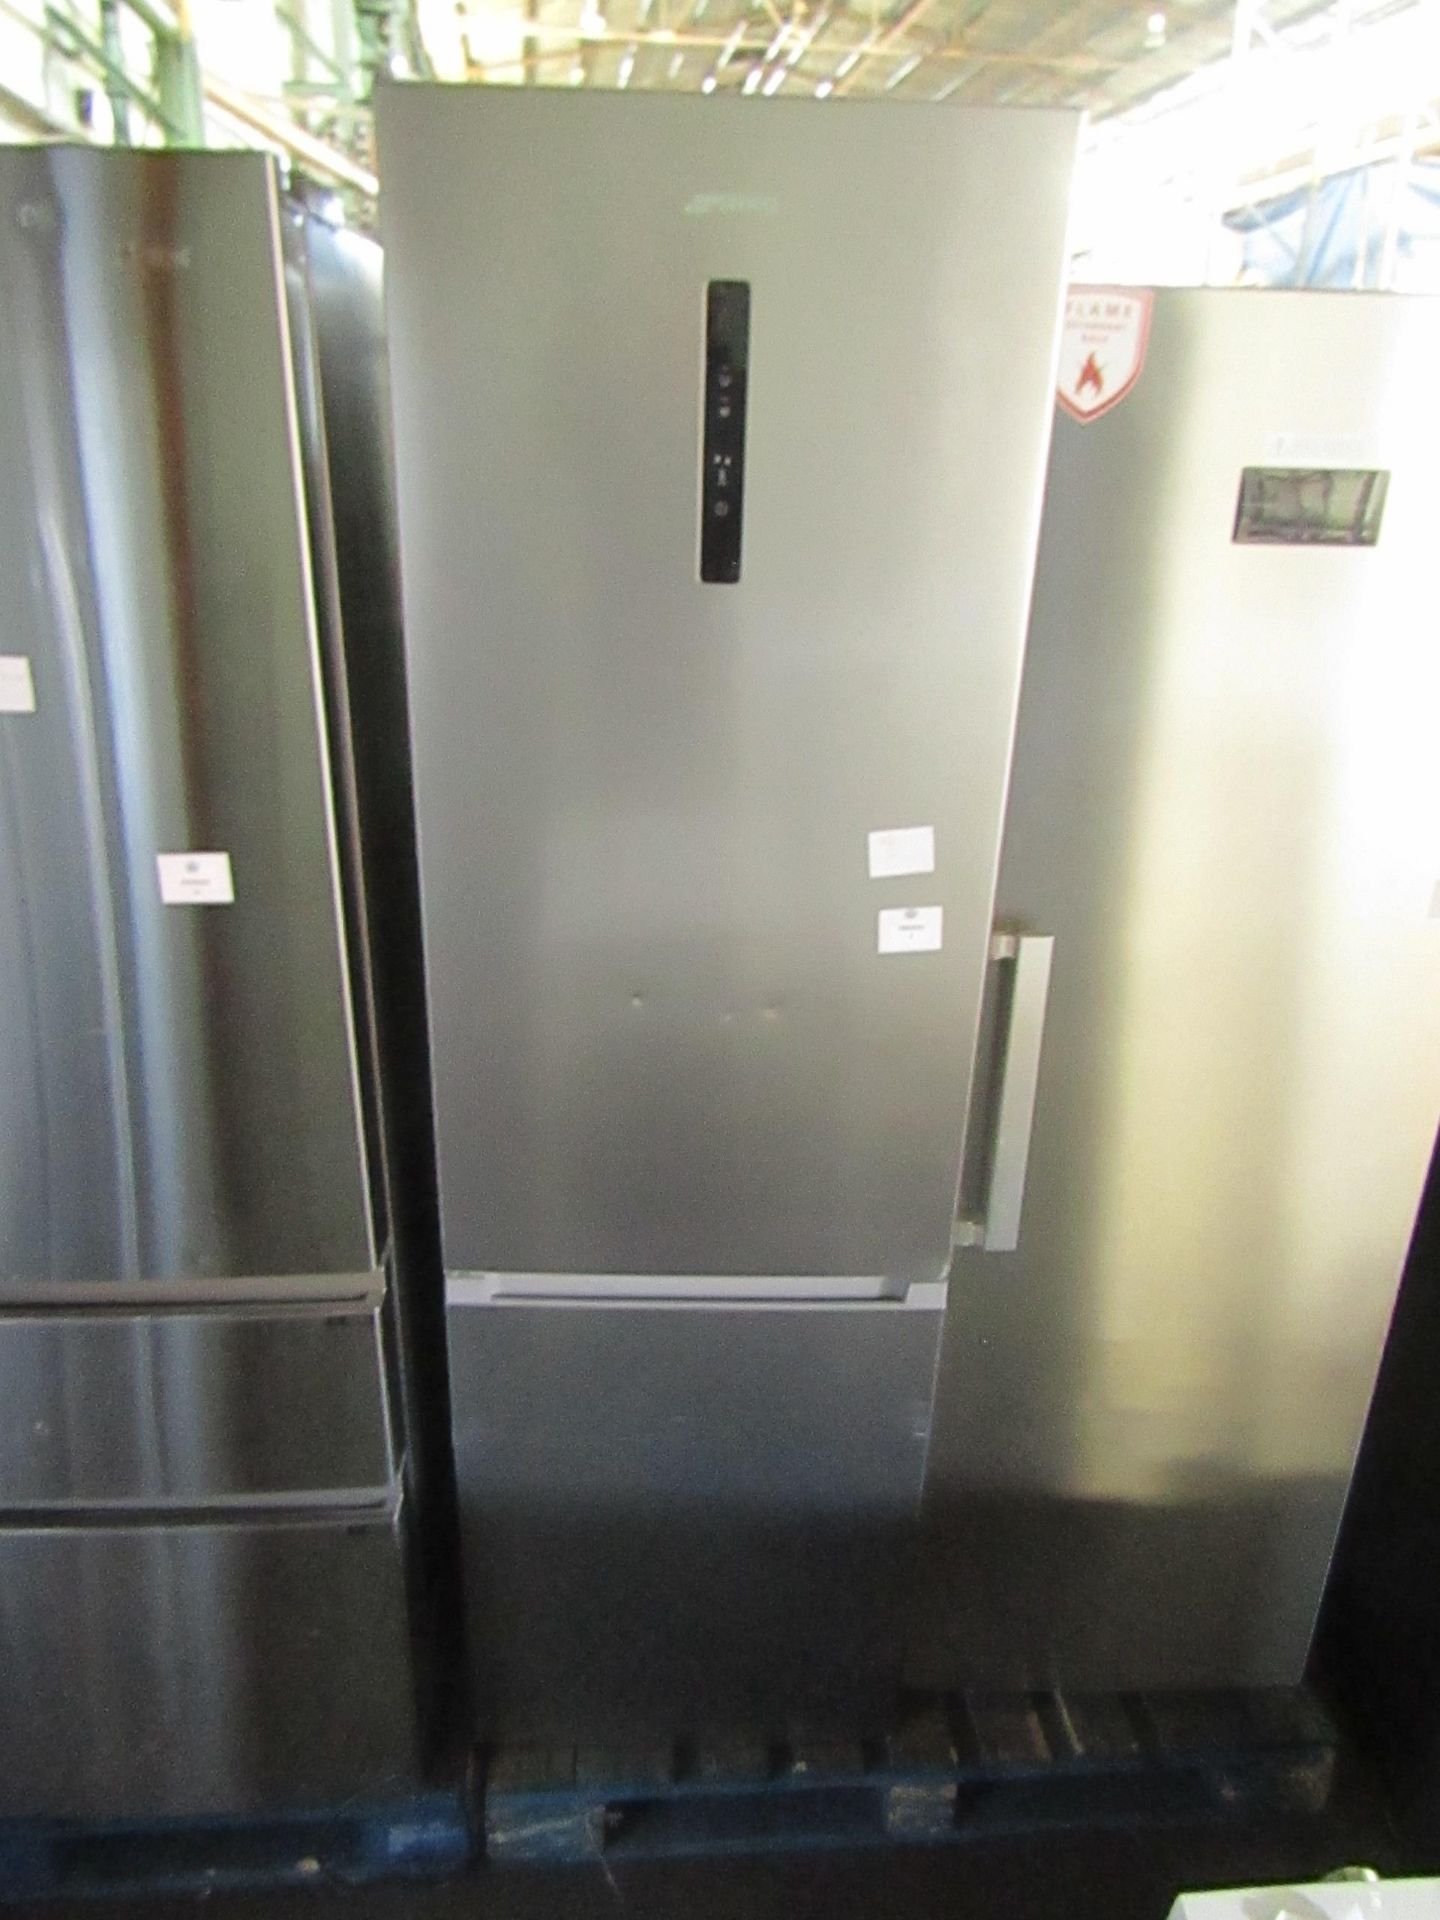 Smeg fridge freezer, clean insode, has a couple of dents nad ,arkls on the front, tested working for